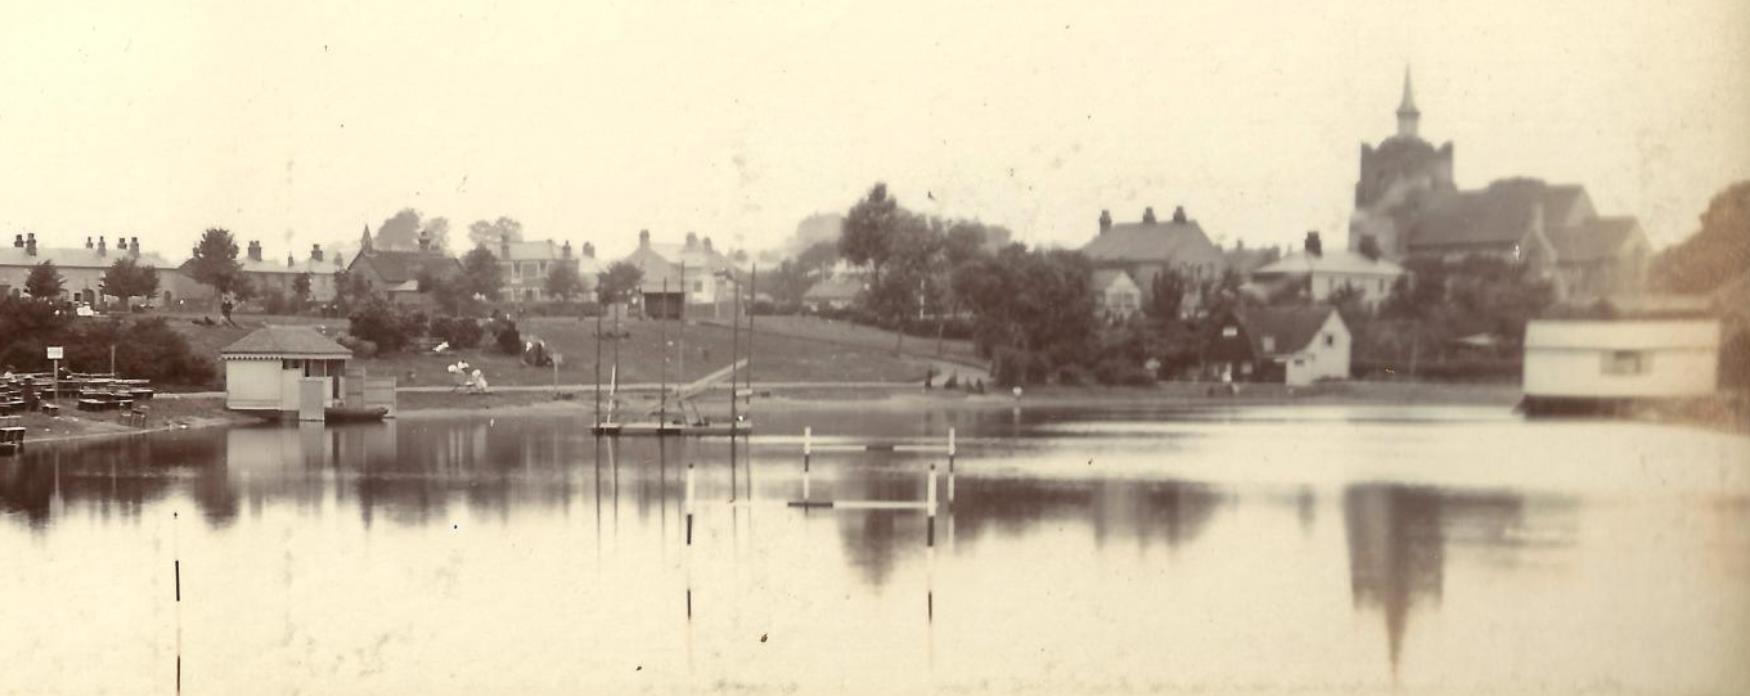 Sepia toned image of the Marine Lake in Maldon's Promenade Park dating from 1900s